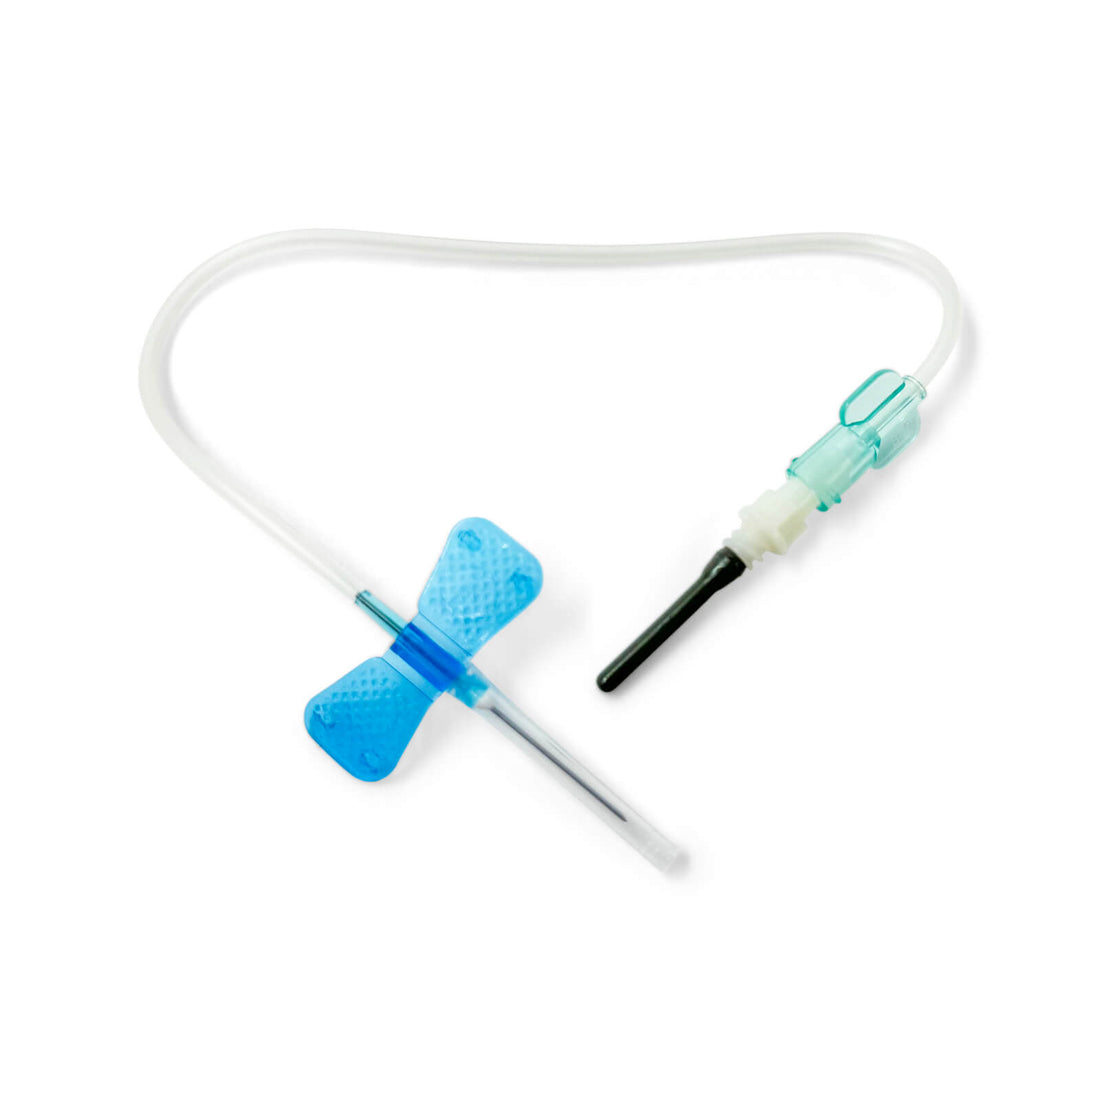 Butterfly Needle &amp; Vacutainer Set